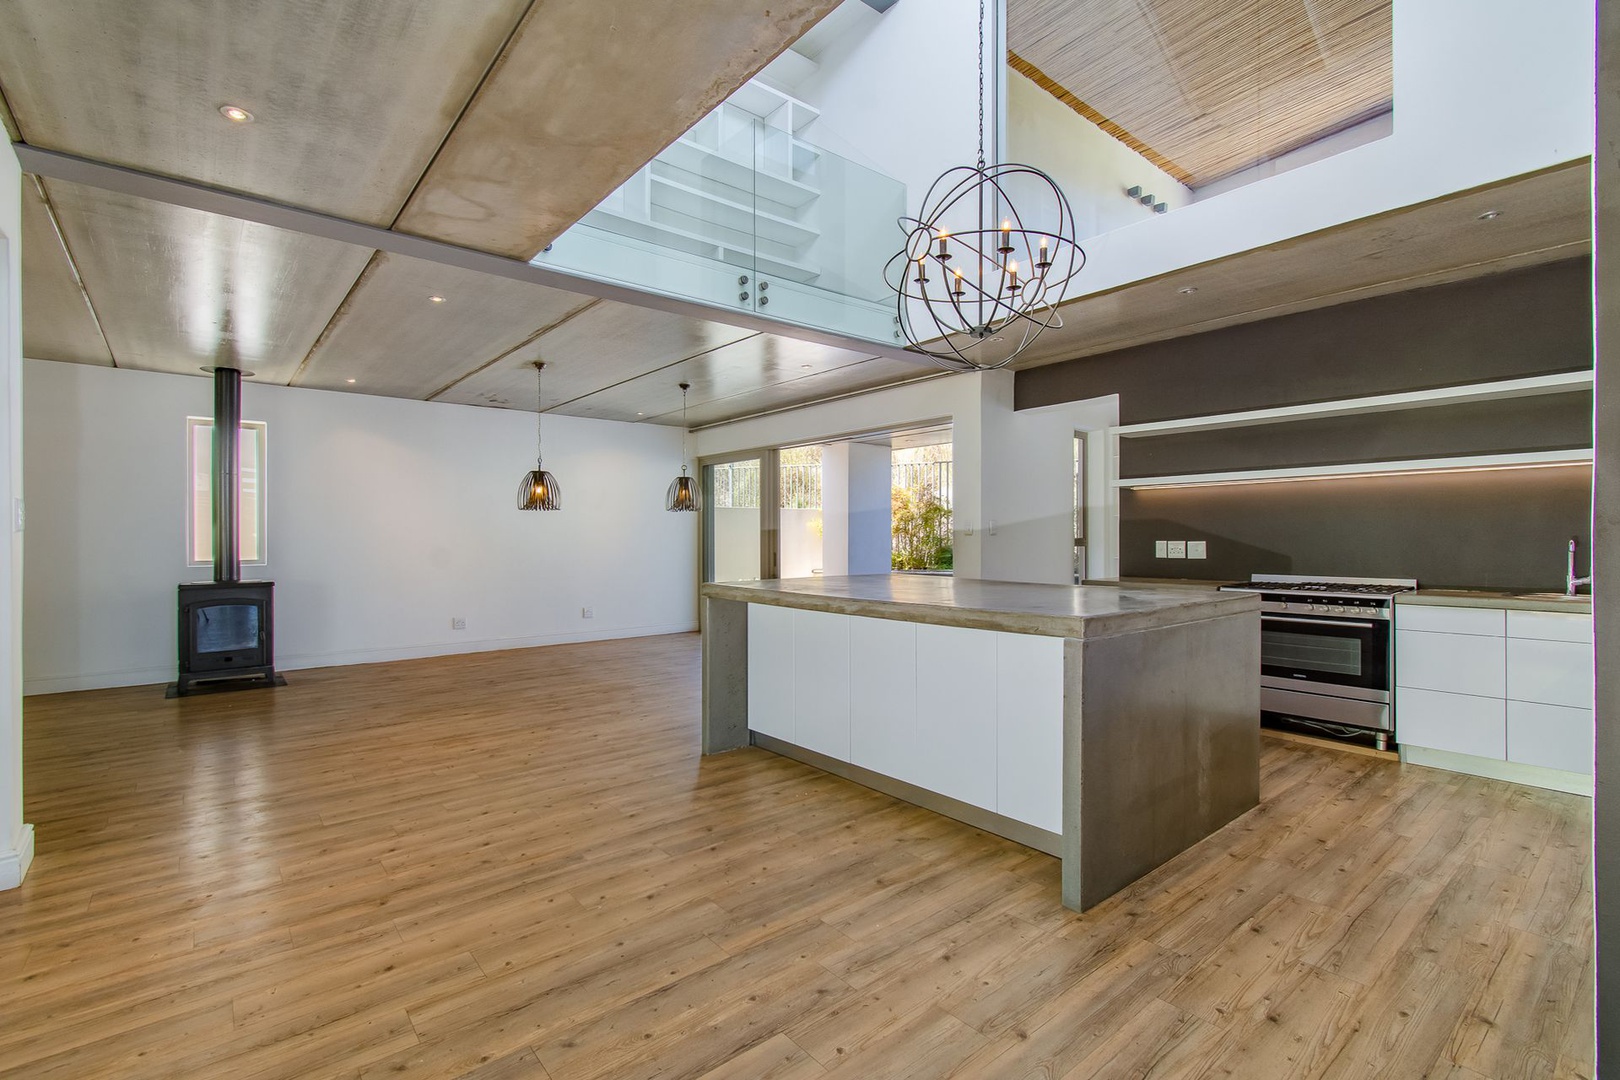 House in Brandwacht aan Rivier - Open-Plan Kitchen with Double Volume Ceiling